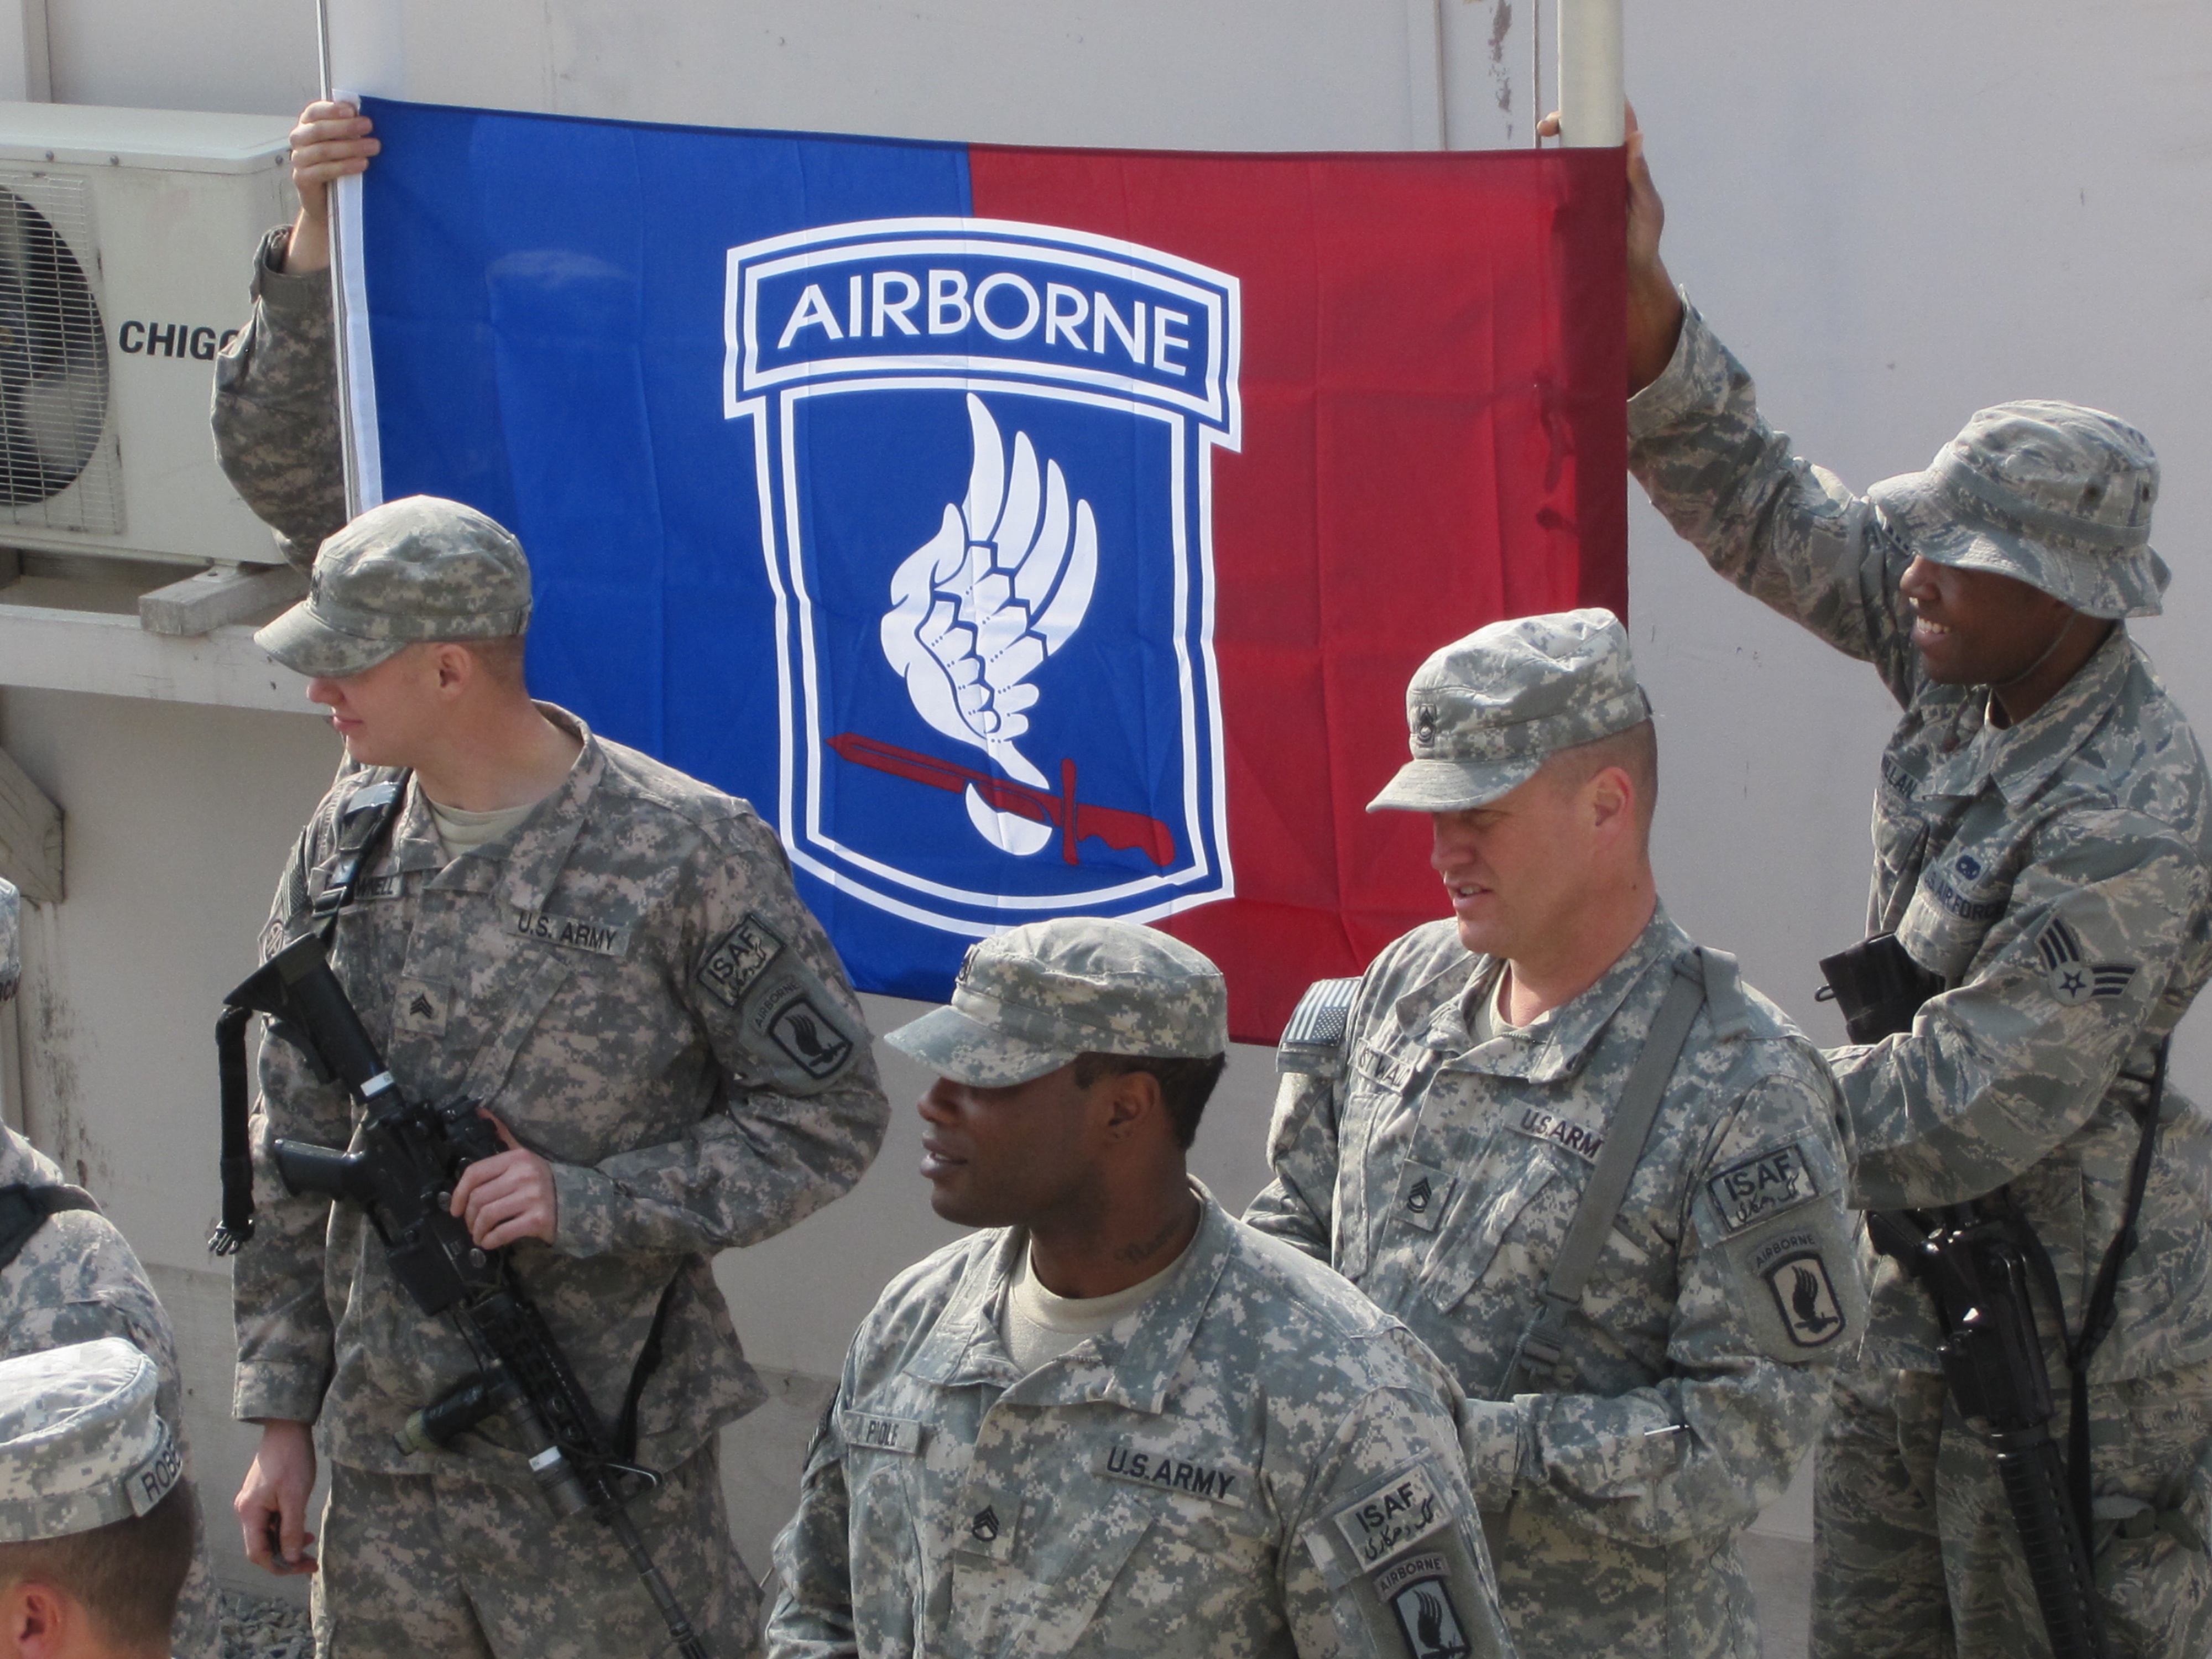 is-that-an-af-guy-helping-to-unfurl-the-173rds-unit-banner.jpg